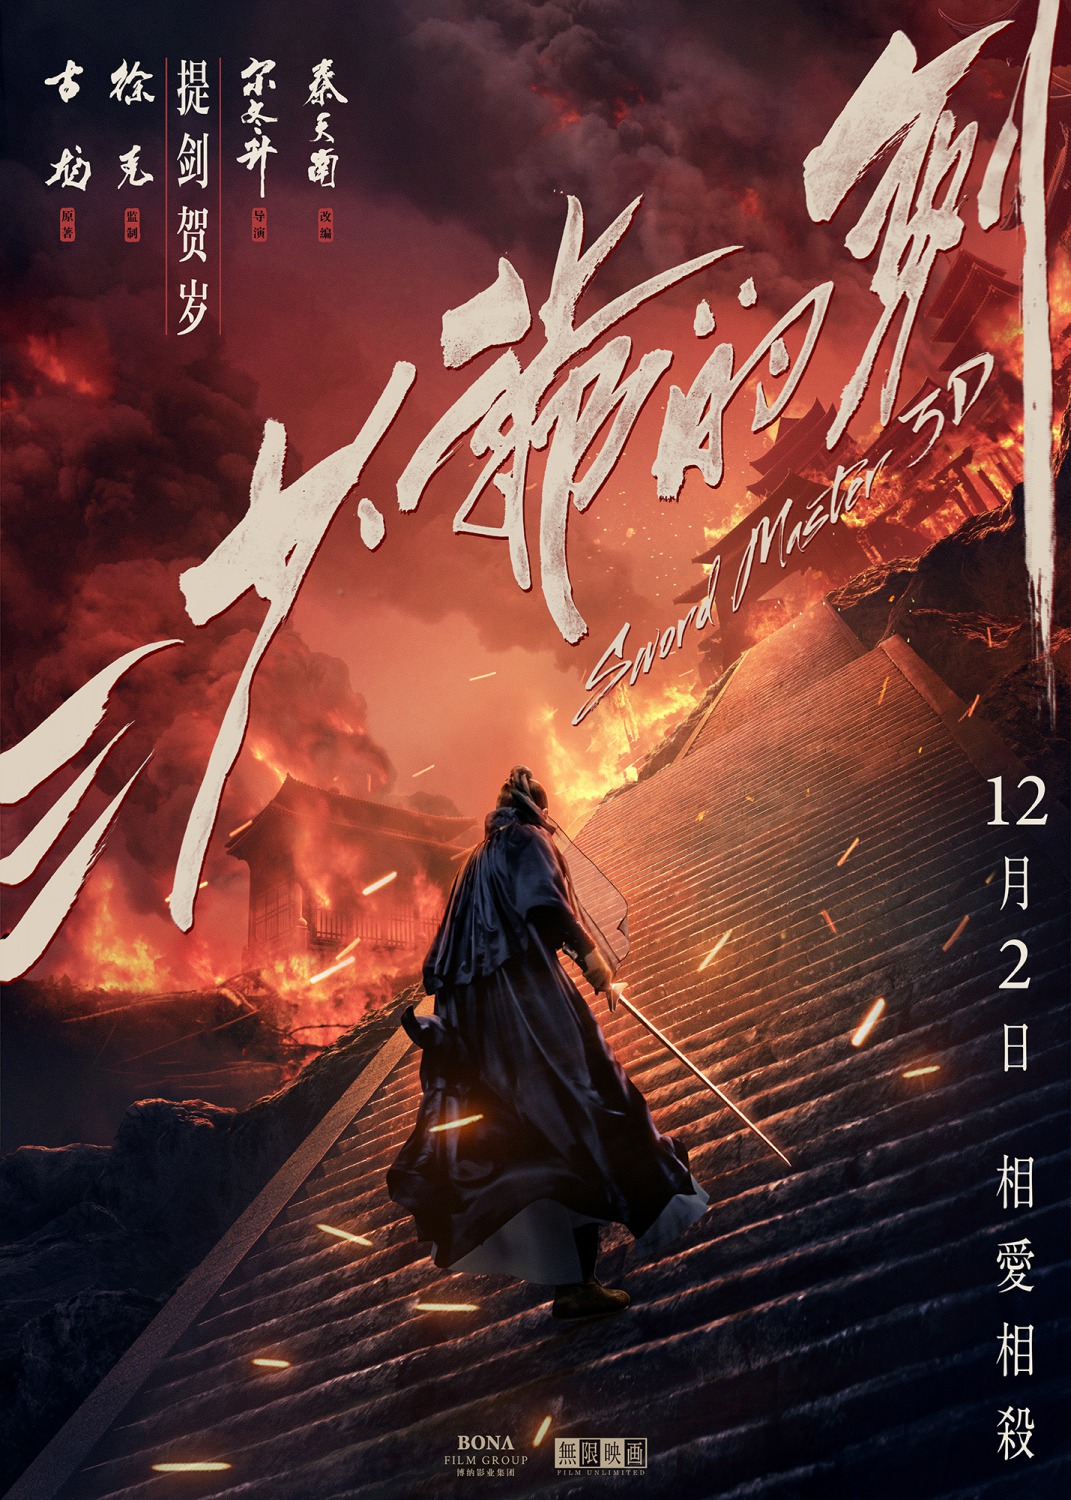 Extra Large Movie Poster Image for San shao ye de jian (#11 of 11)